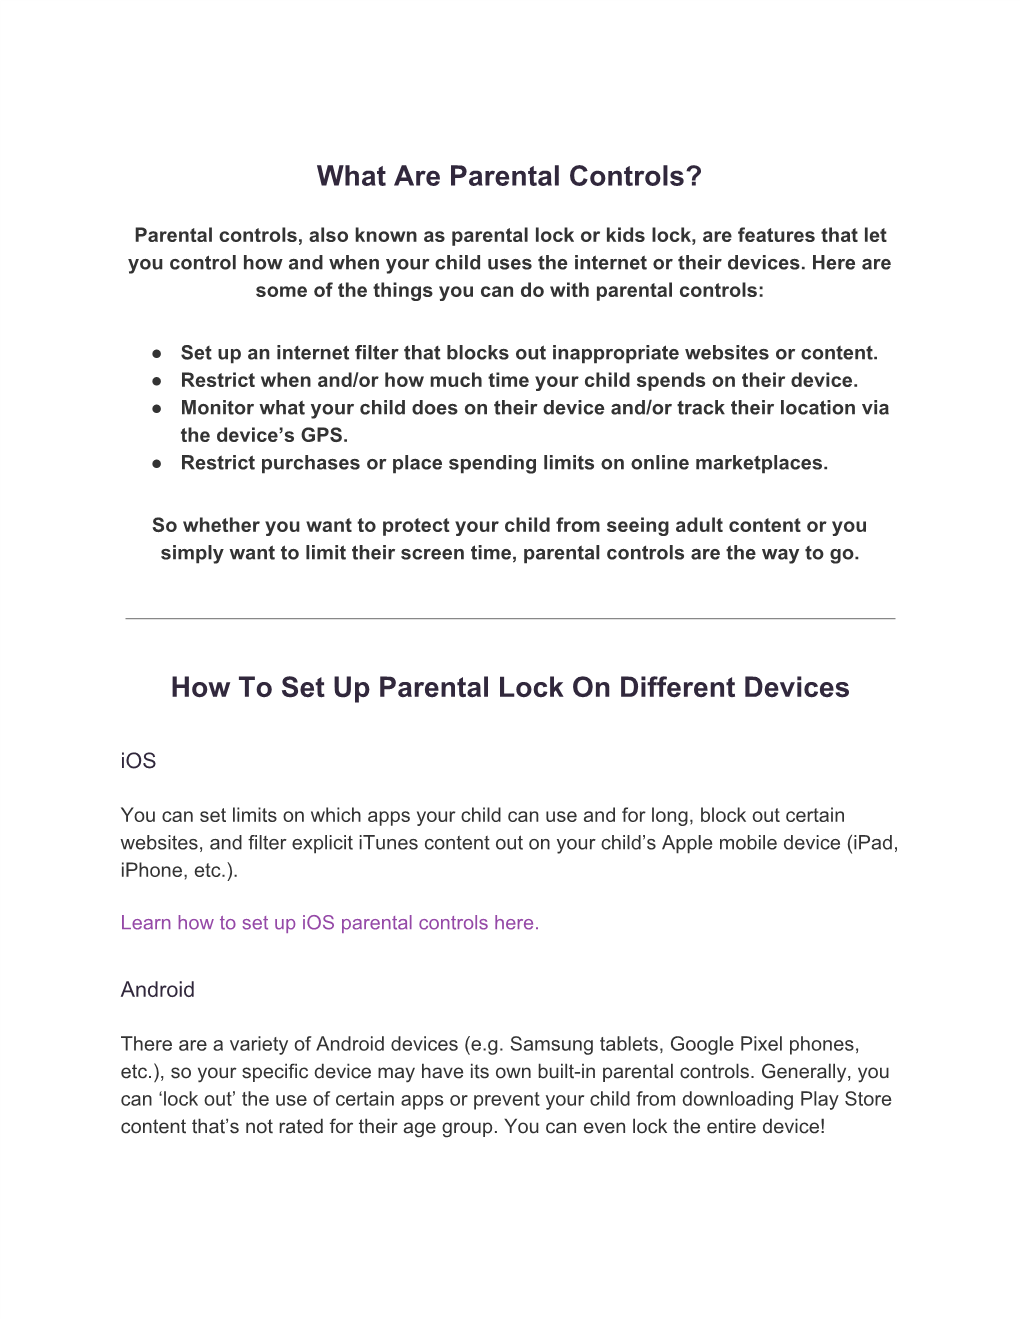 What Are Parental Controls? How to Set up Parental Lock on Different Devices